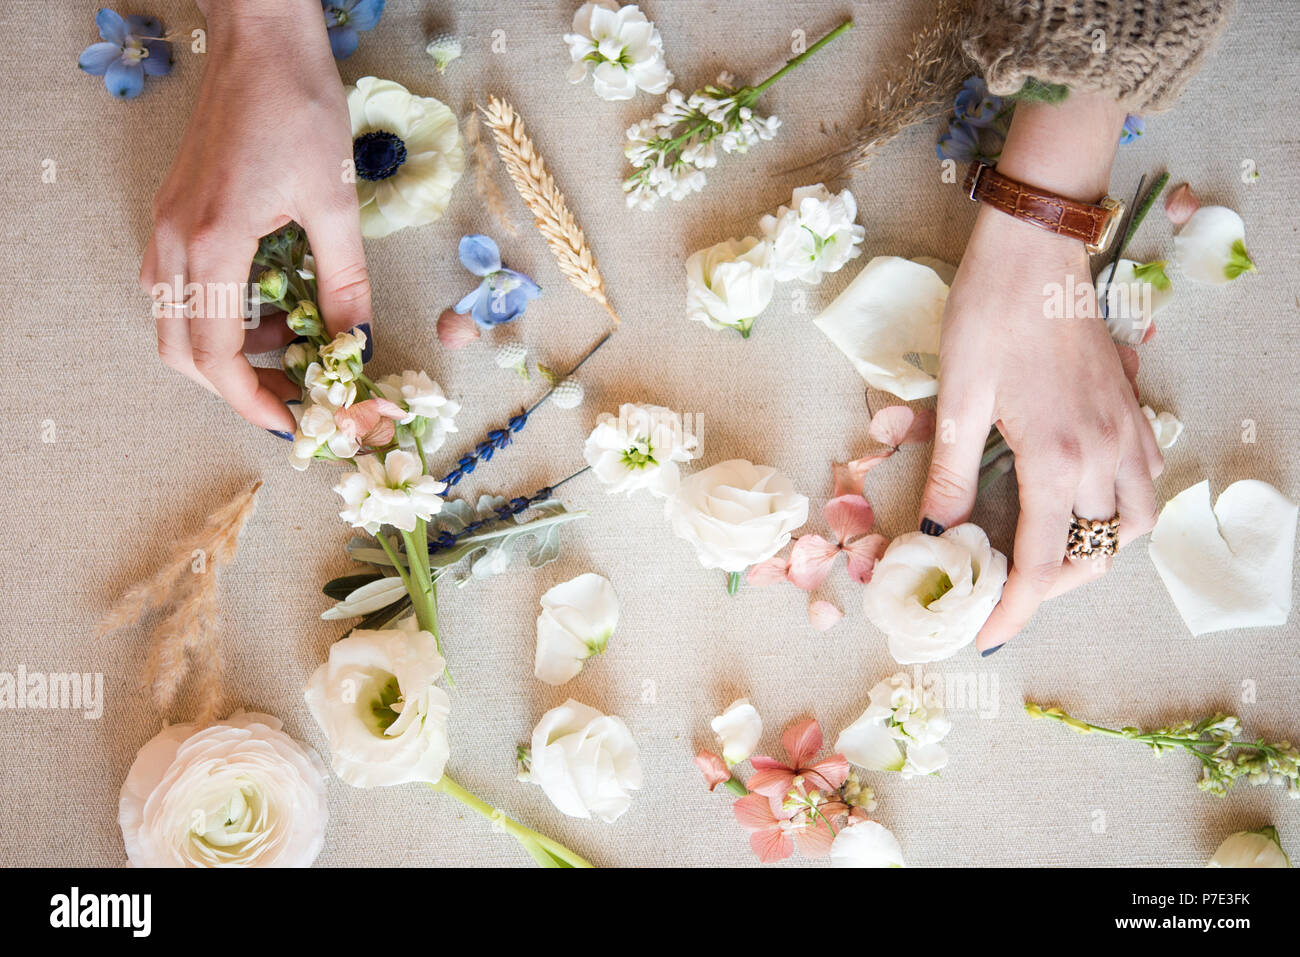 Woman arranging pastel flower heads and stems on textile, detail of hands, overhead view Stock Photo